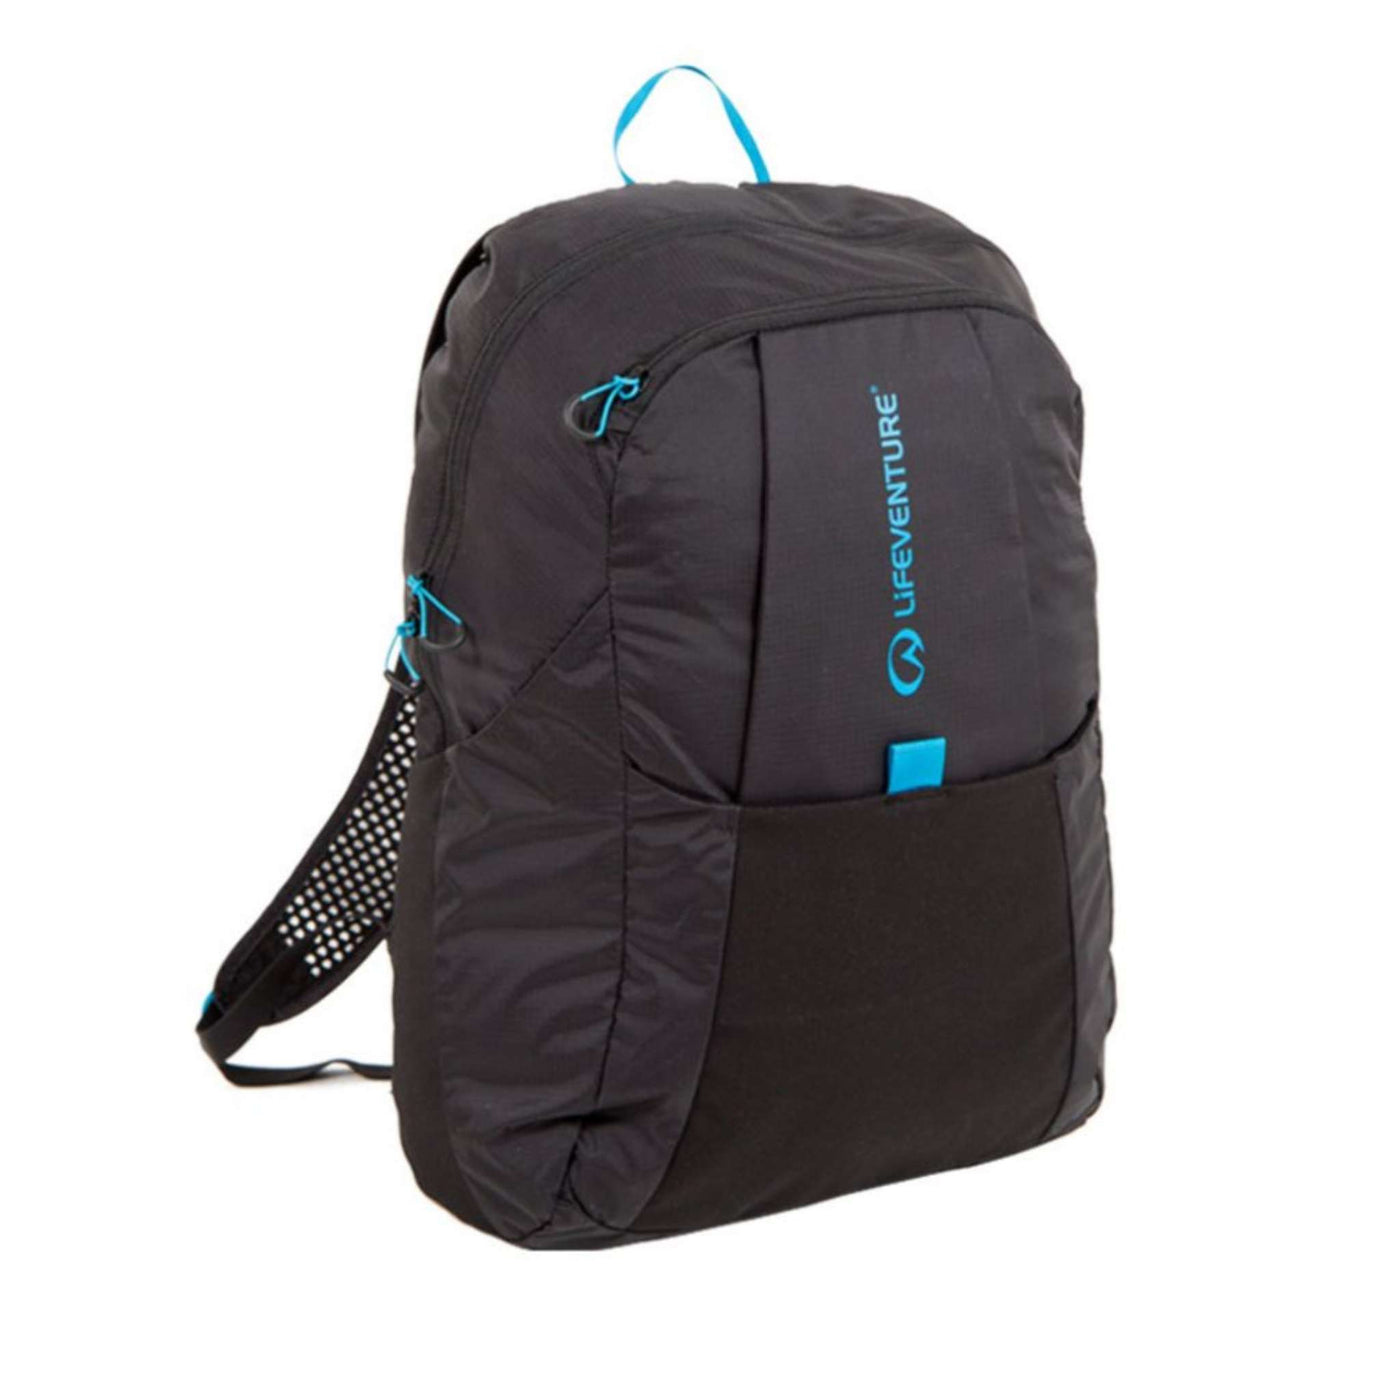 Lifeventure Packable Backpack - 25L | Day Packs and Commute Backpack | Further Faster Christchurch NZ